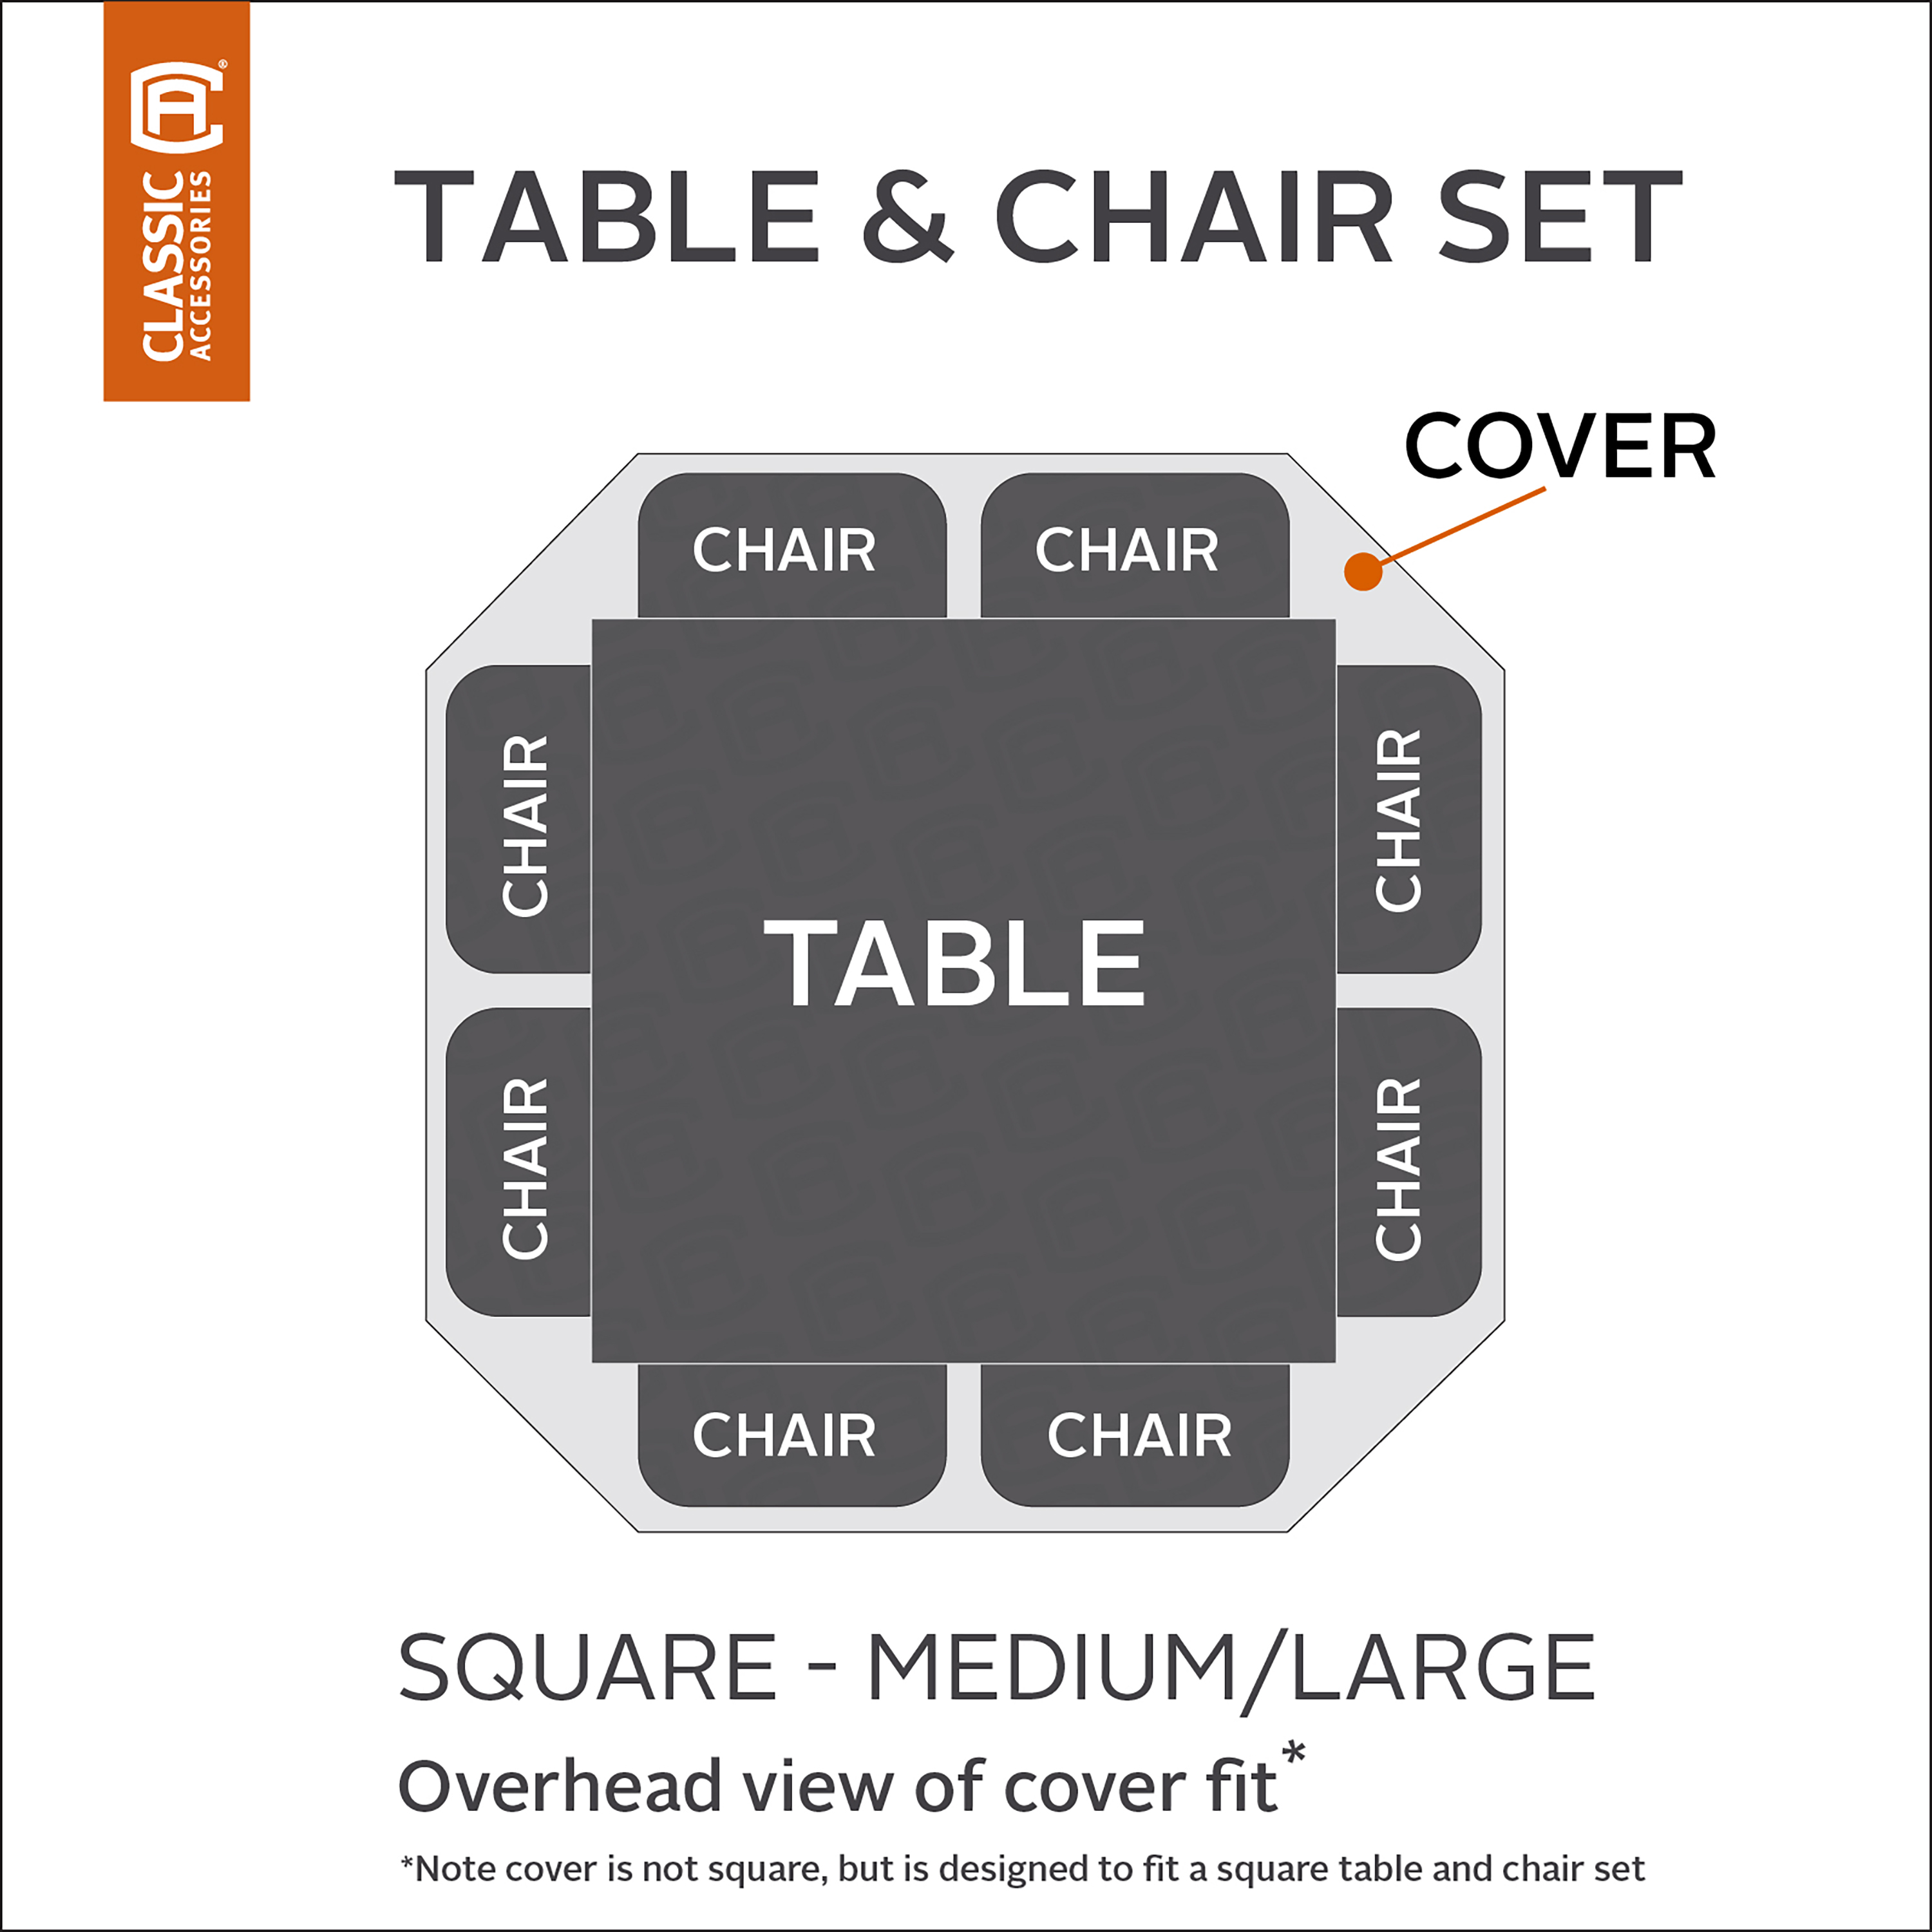 Classic Accessories Ravenna Water-Resistant 86 Inch Square Patio Table & Chair Set Cover - image 3 of 19